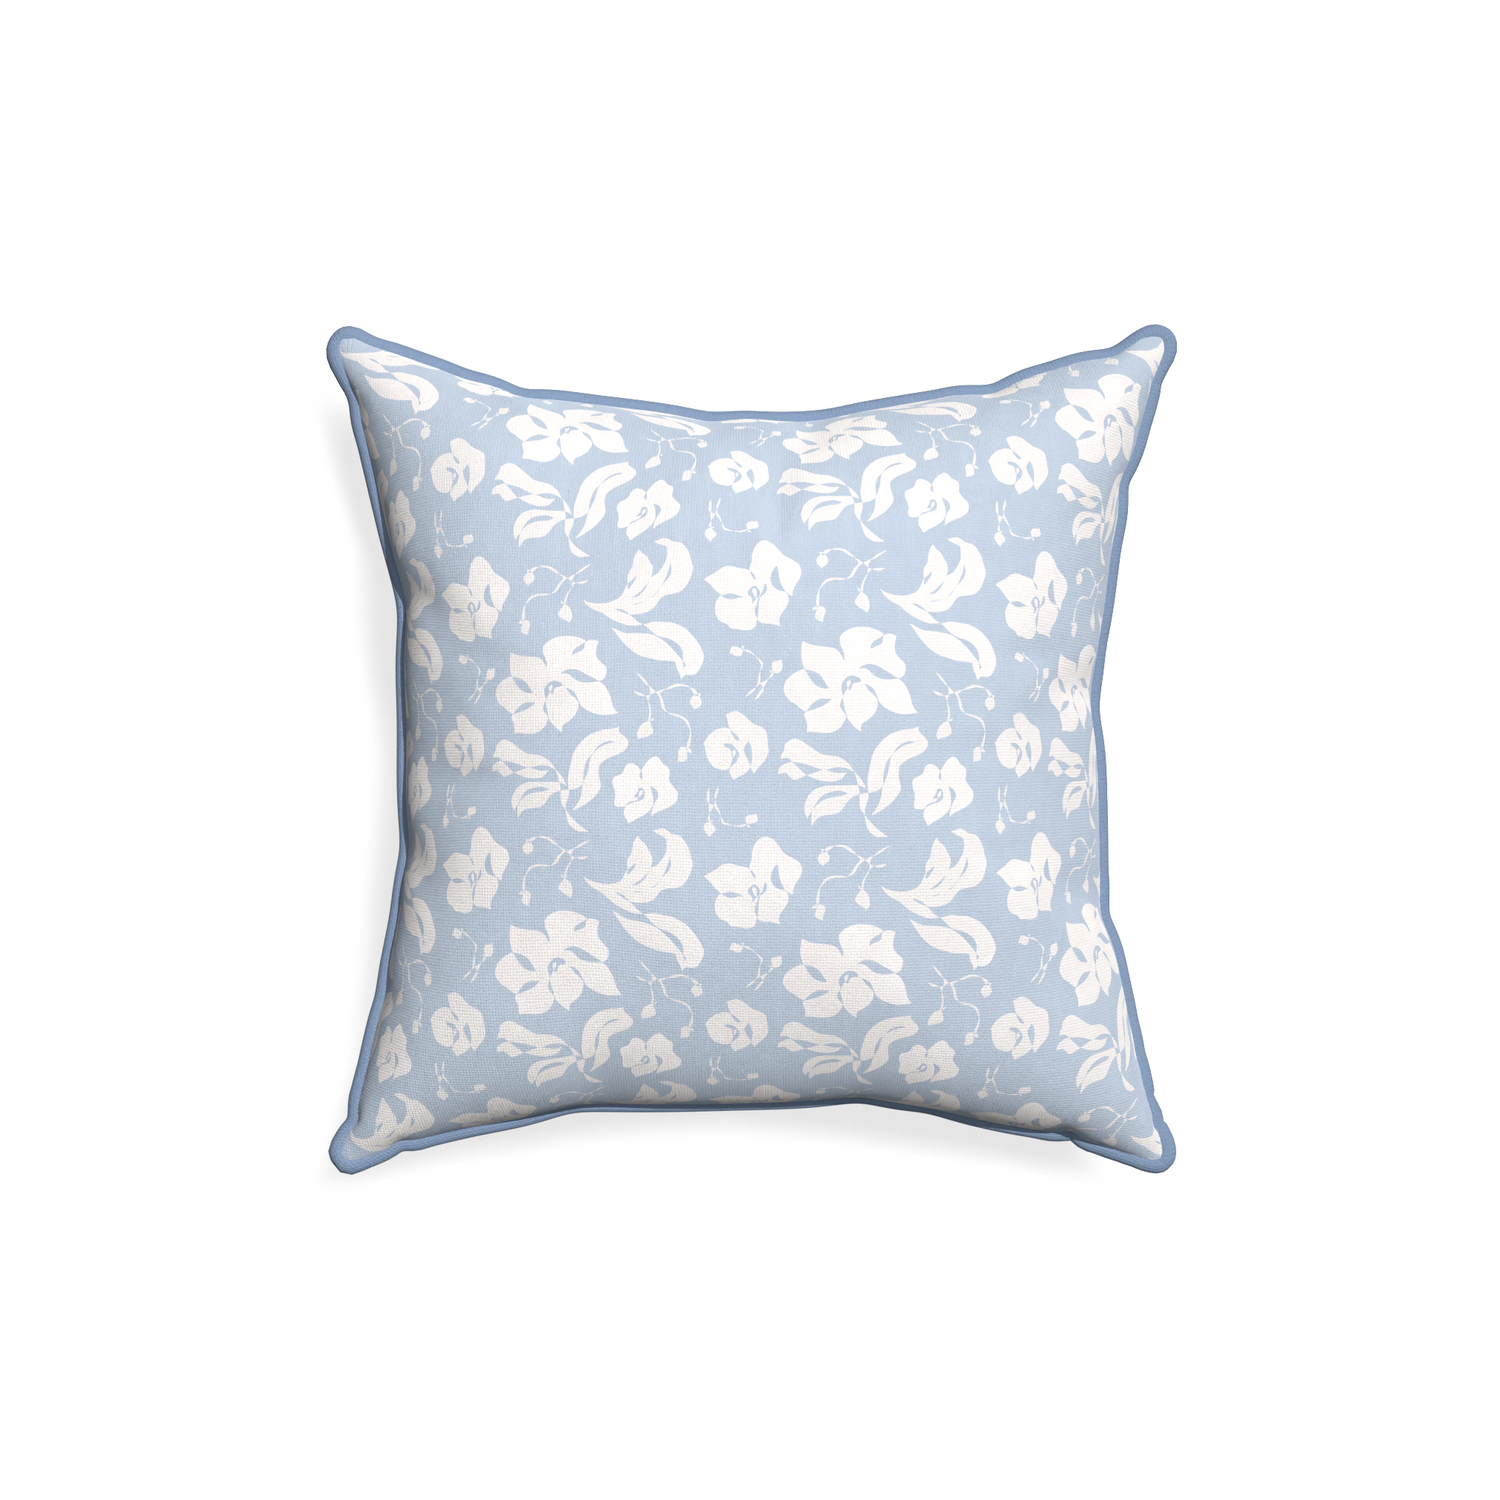 18-square georgia custom pillow with sky piping on white background